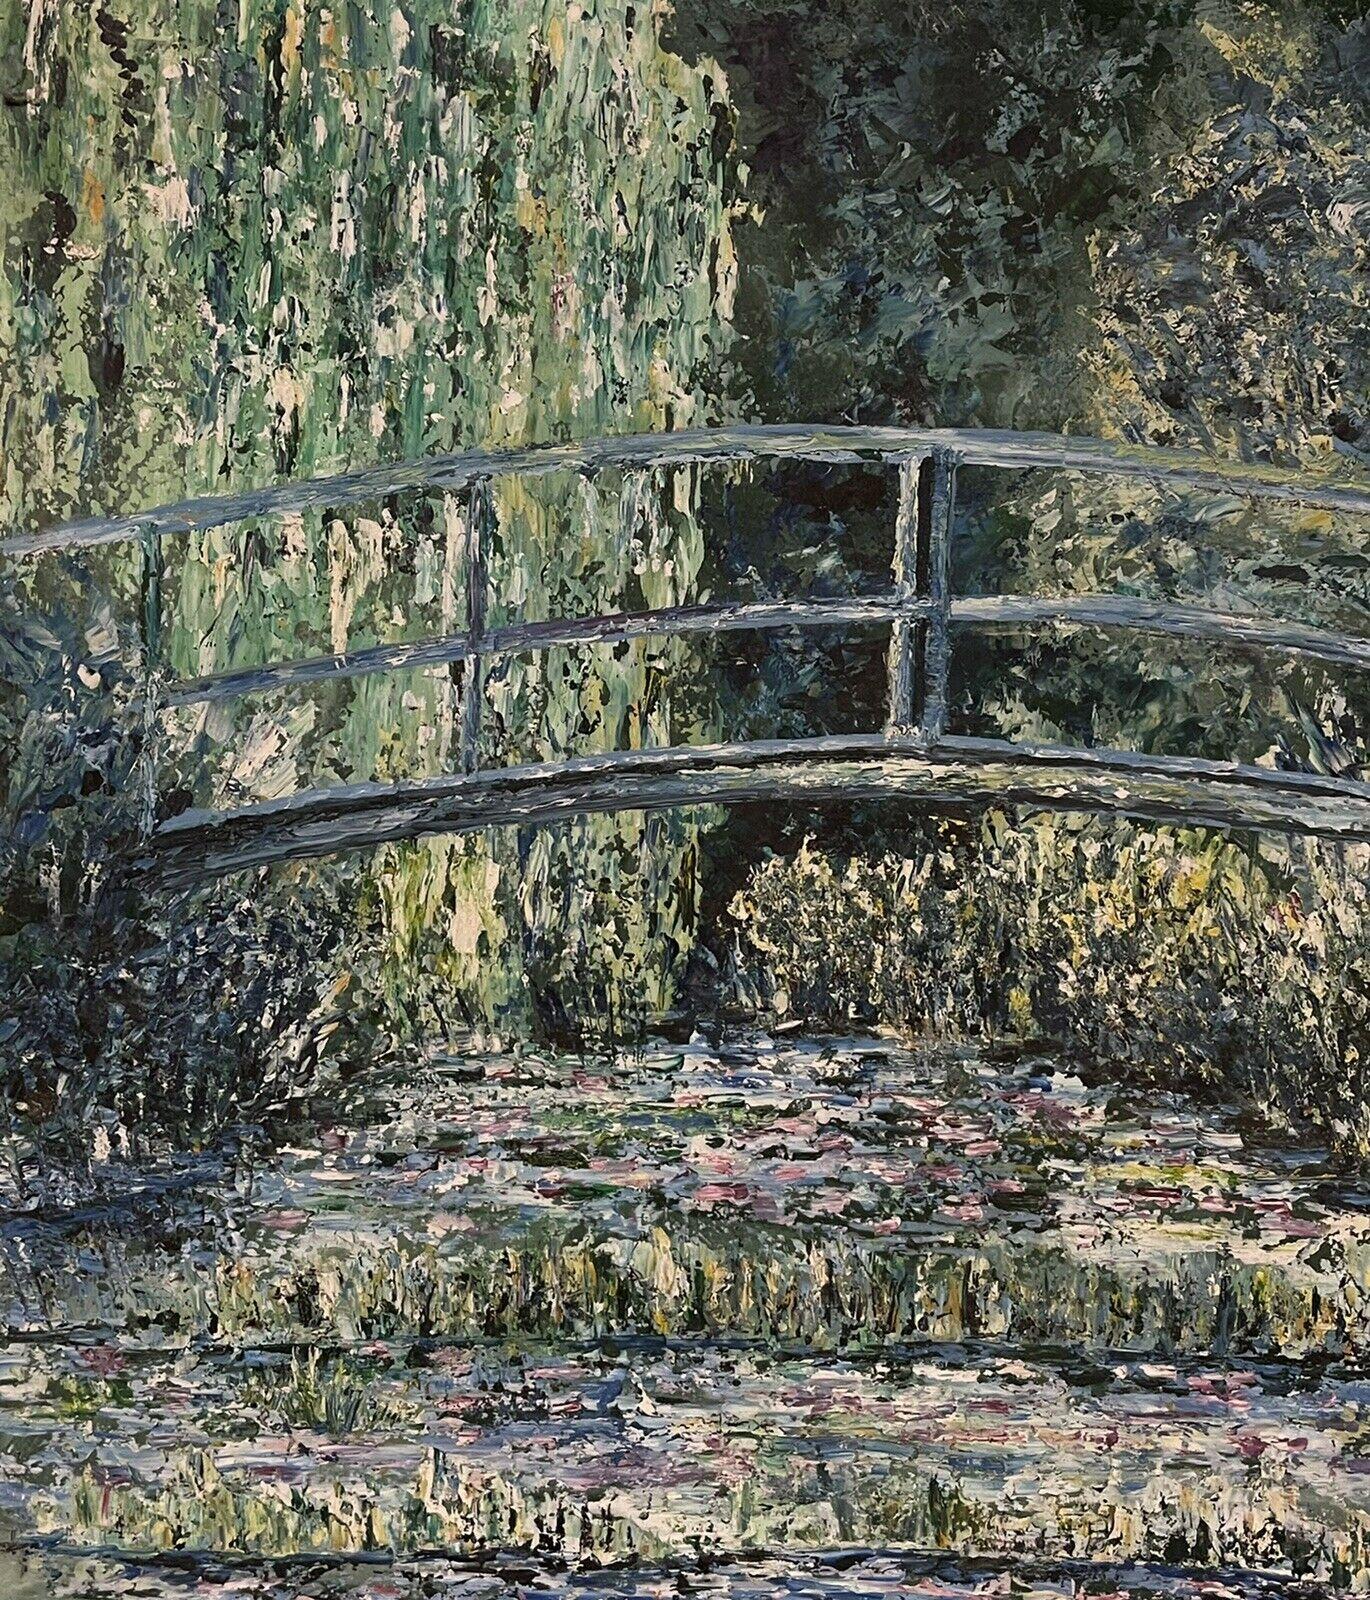 Artist/ School: French School, signed front and back, dated verso 1984. 

Title: Monet's Waterlily pond at Giverny, with the Japanese footbridge. 

Medium: signed oil painting on board, framed and inscribed verso.

Size:
           framed: 23.25 x